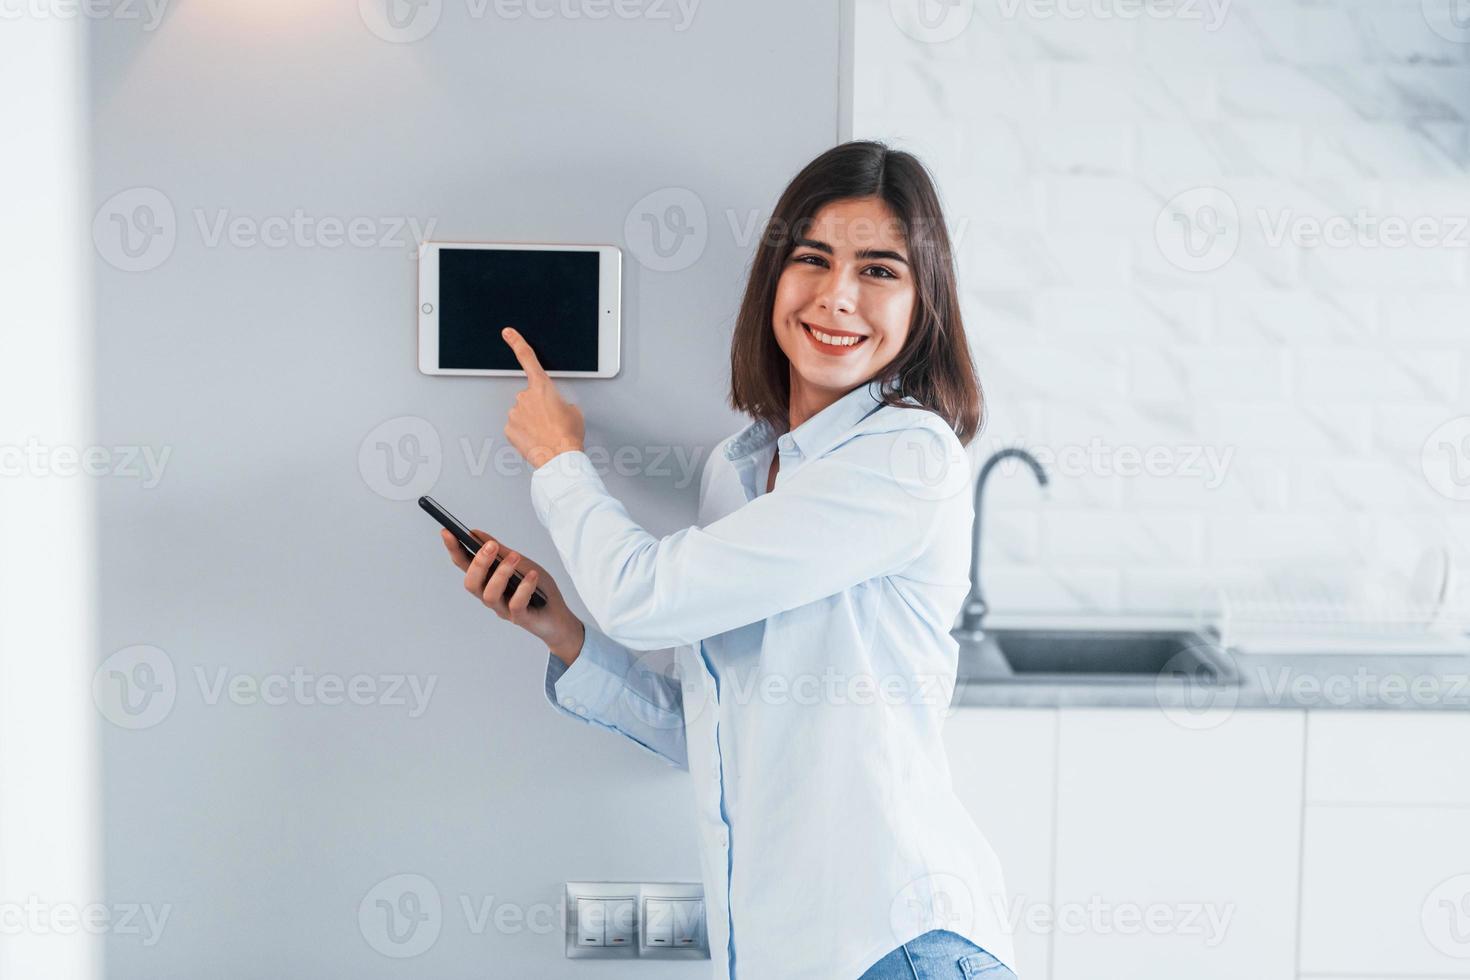 Controlling house by one touch. Young woman is indoors in smart house room at daytime photo